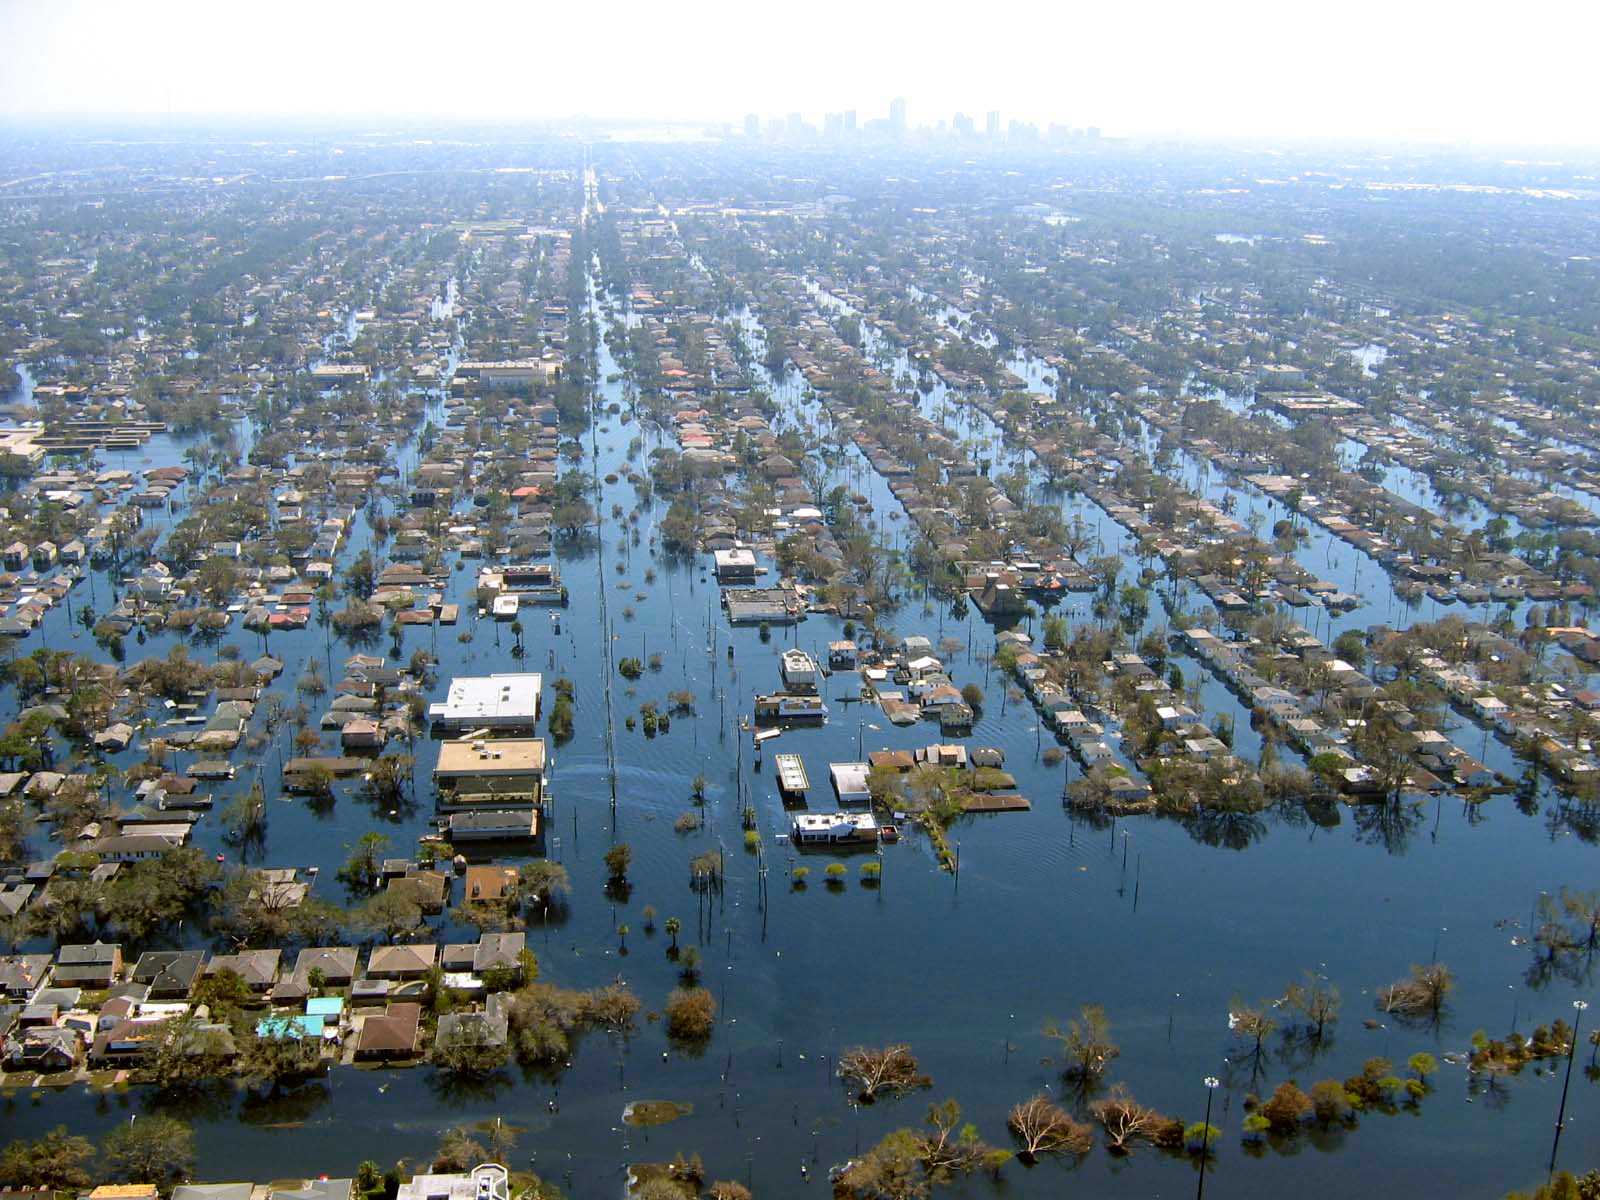 An aerial view of flooding in New Orleans after Hurricane Katrina.